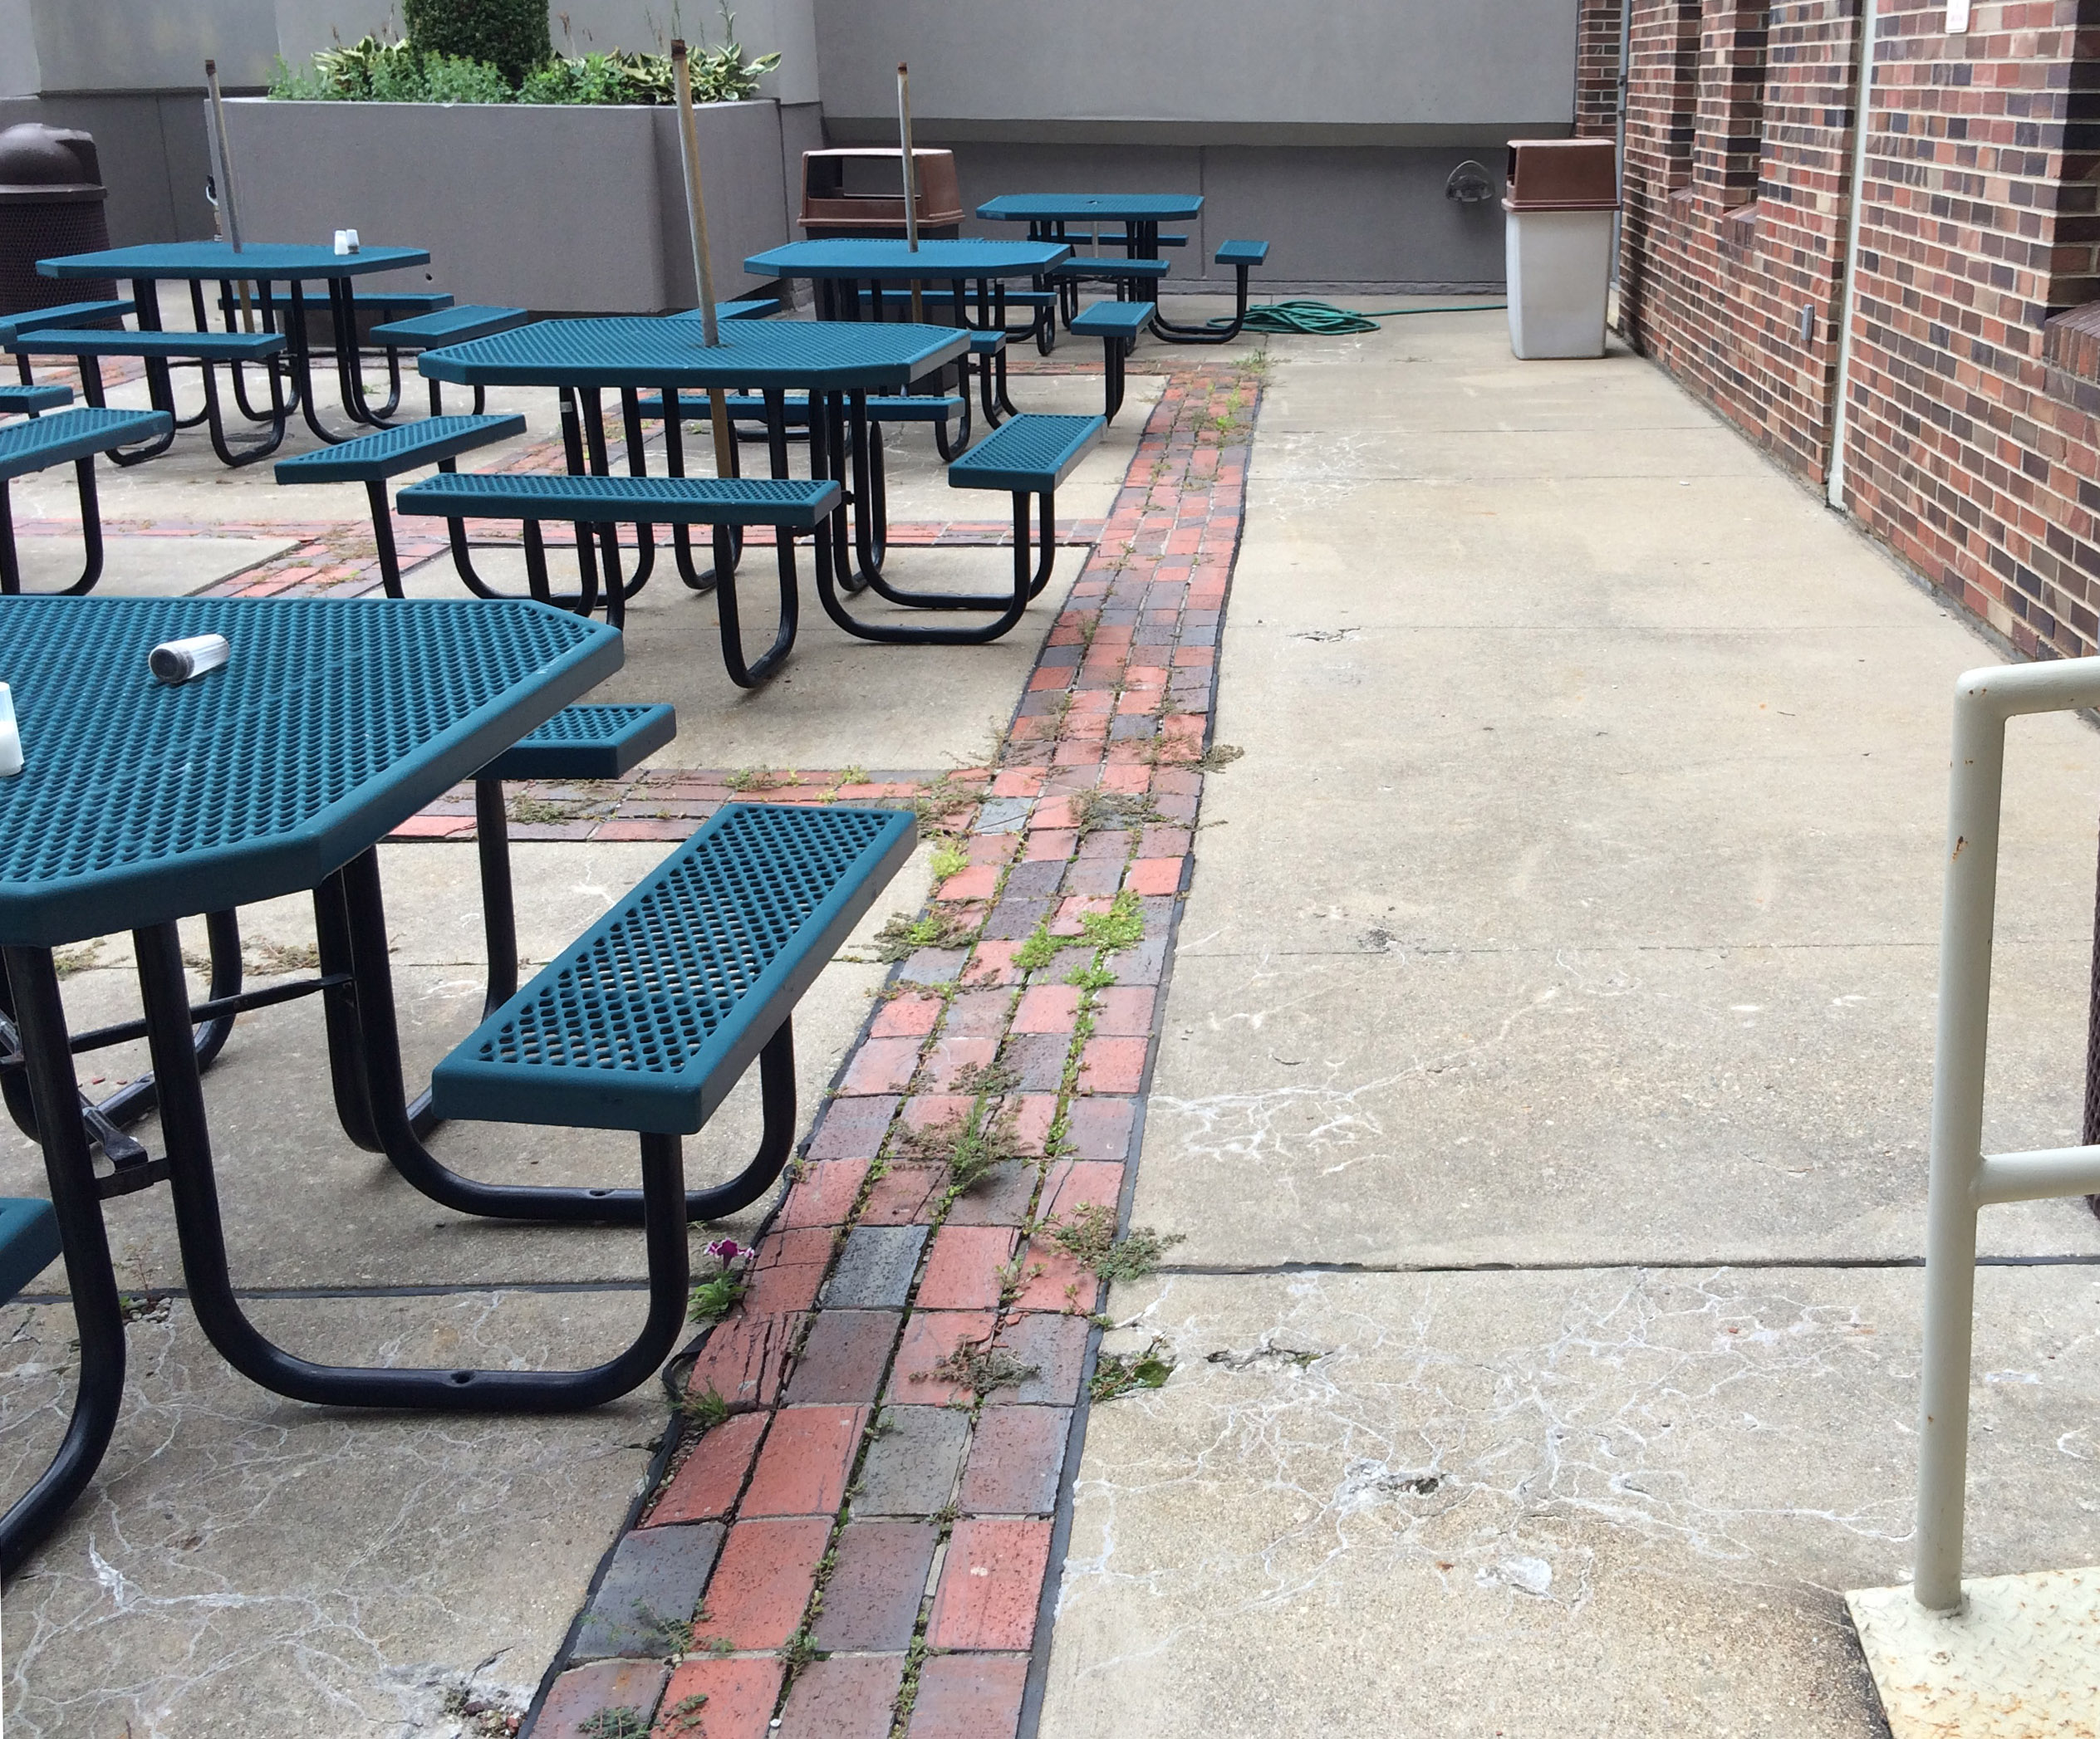 Before AZEK Pavers, the rooftop space had cracked concrete and brick.